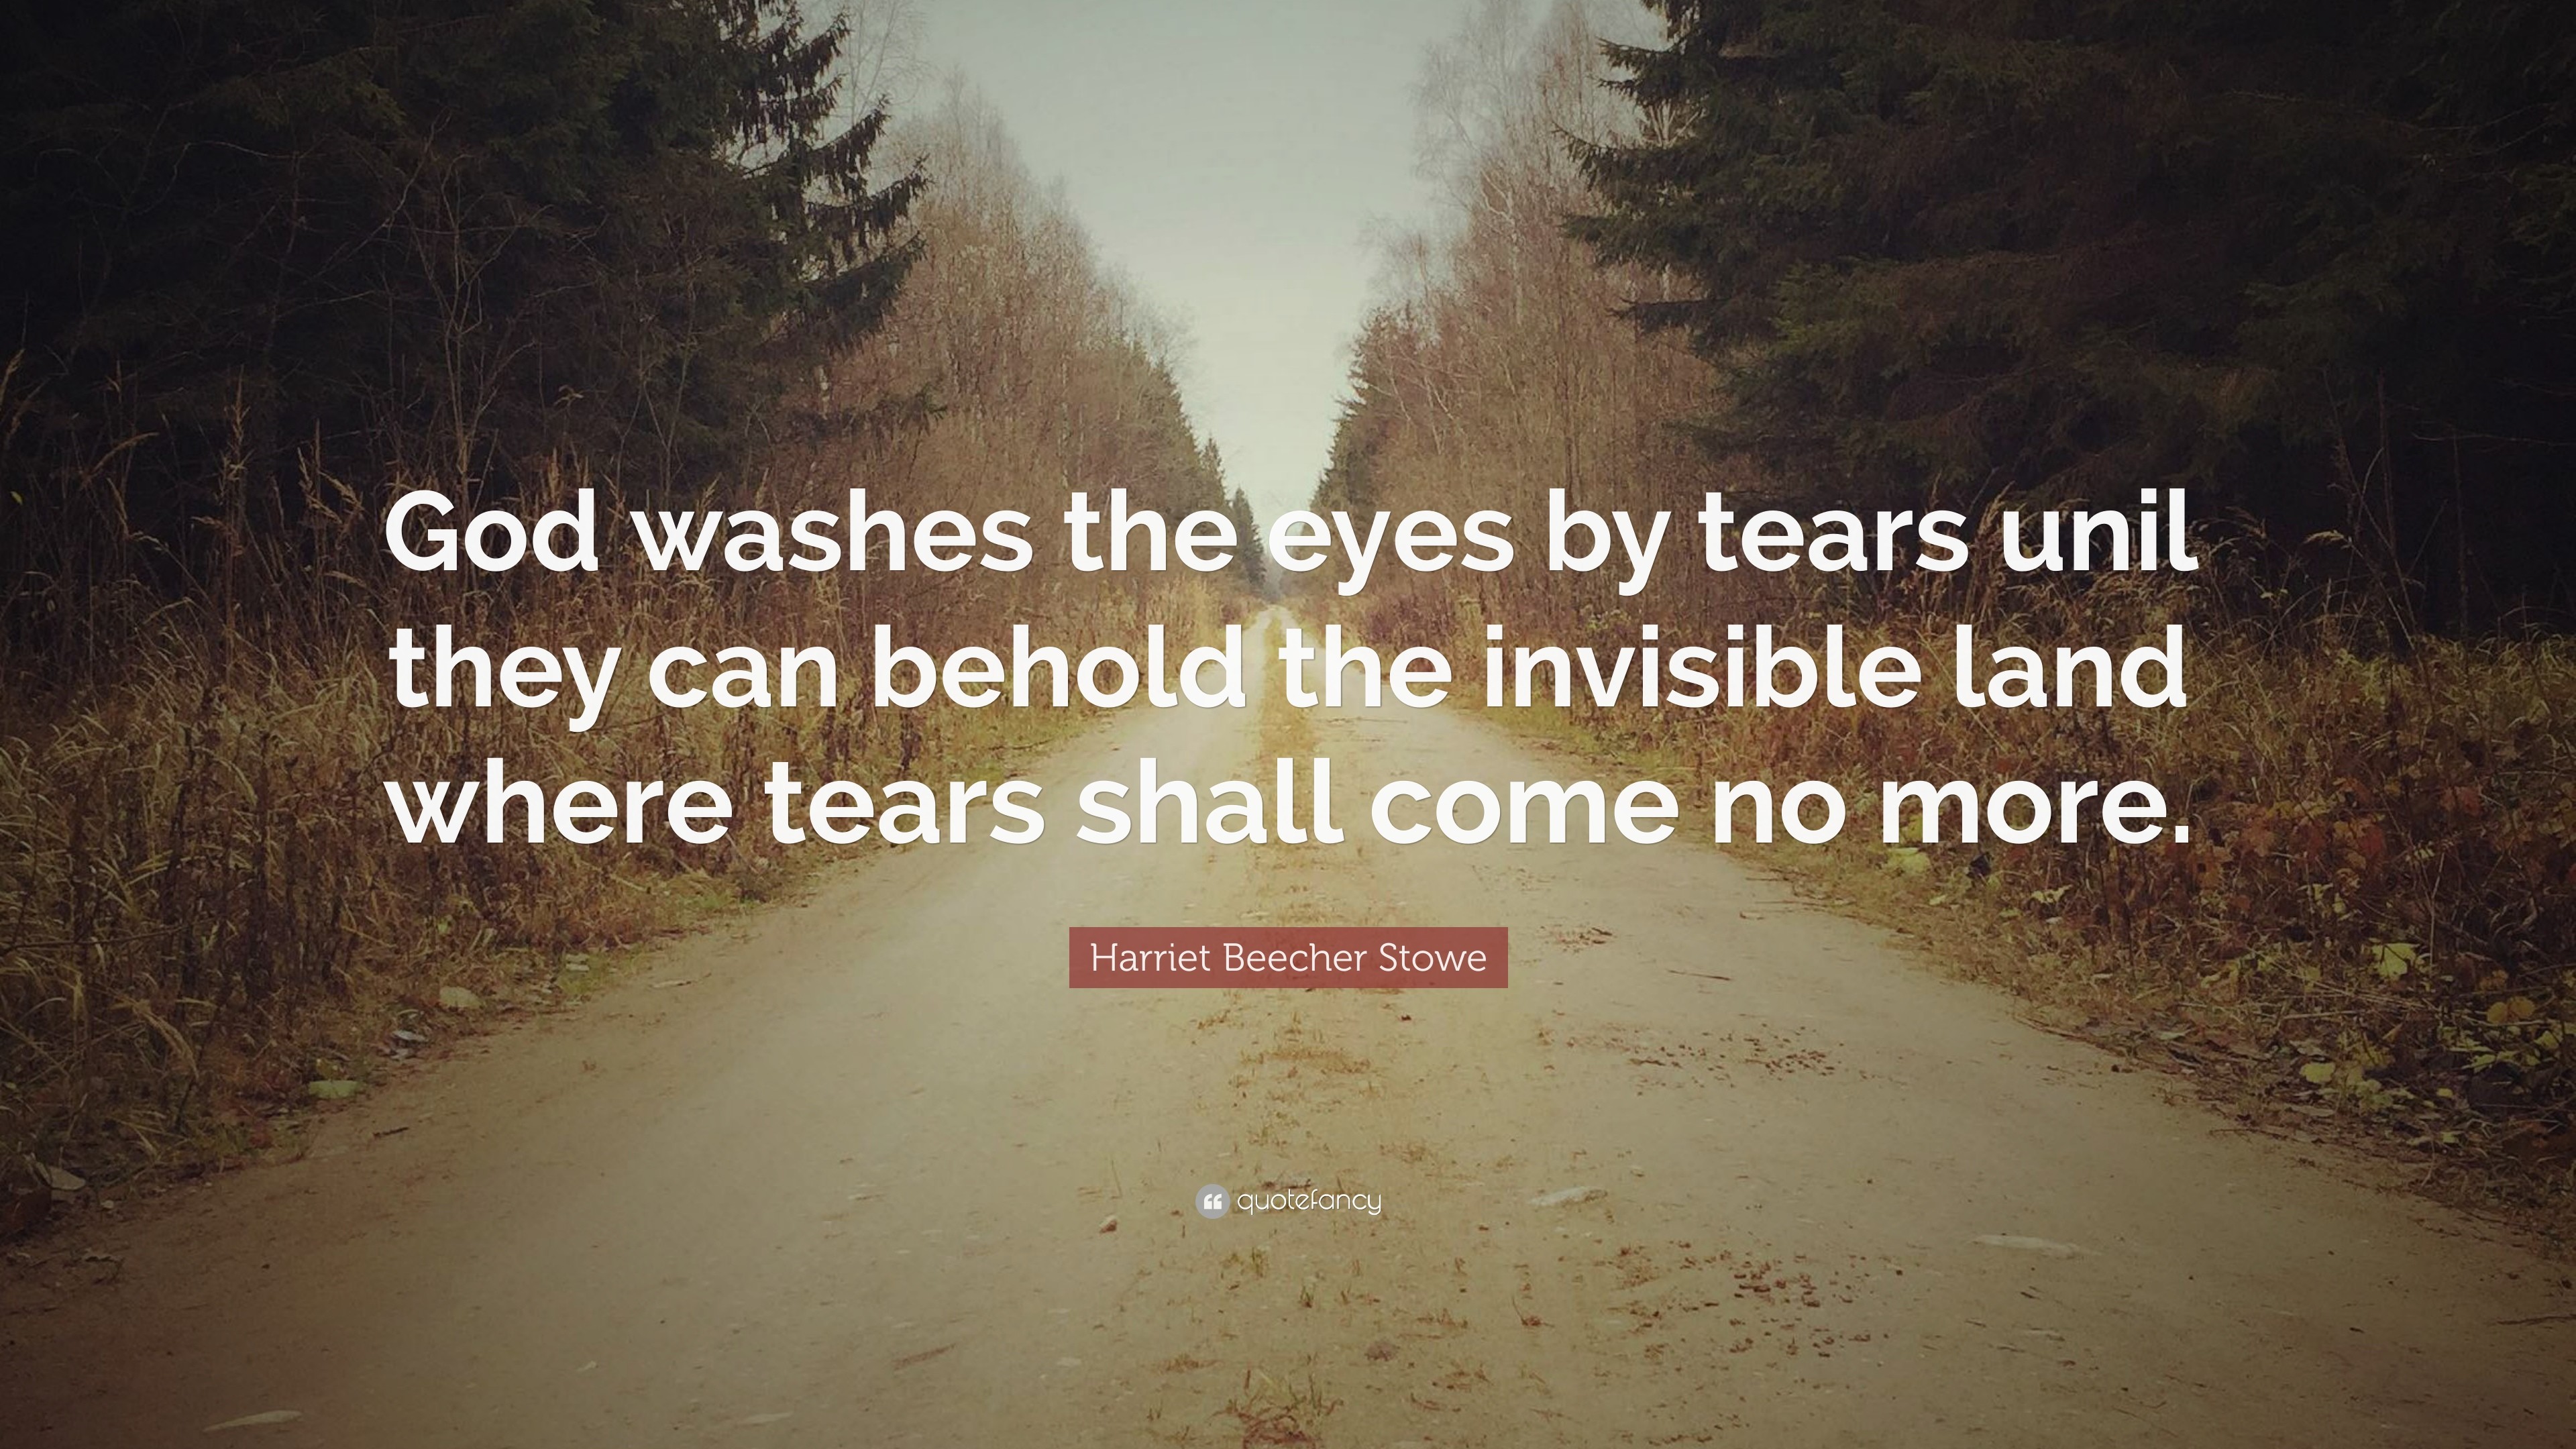 3840x2160 Harriet Beecher Stowe Quote: “God washes the eyes by tears unil they can  behold